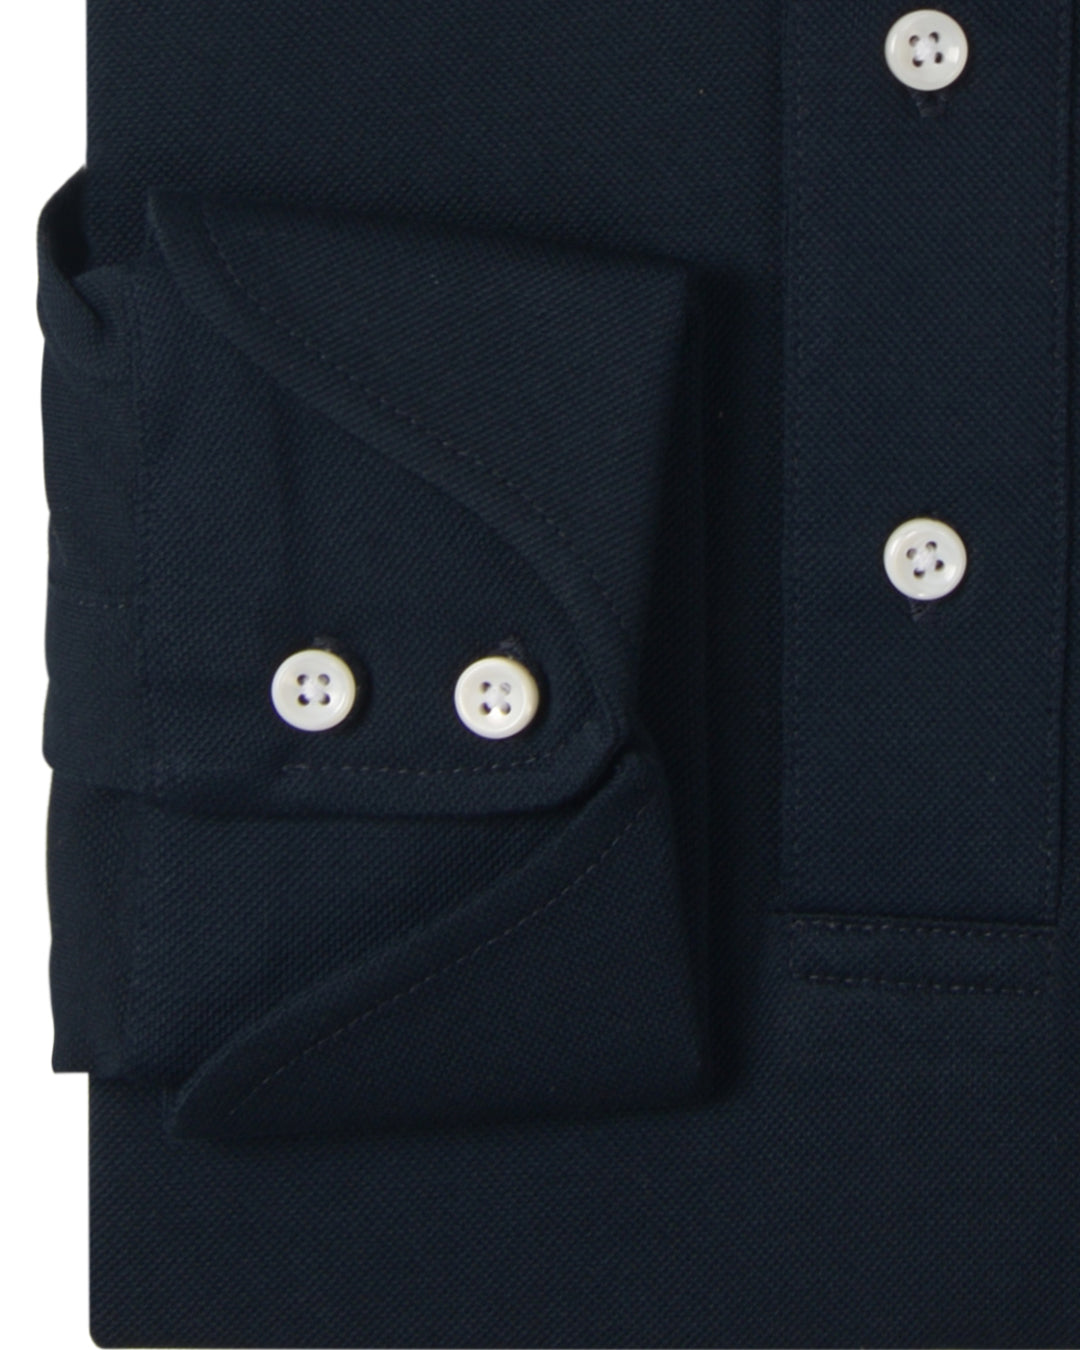 Cuff of the custom oxford polo shirt for men by Luxire in midnight navy